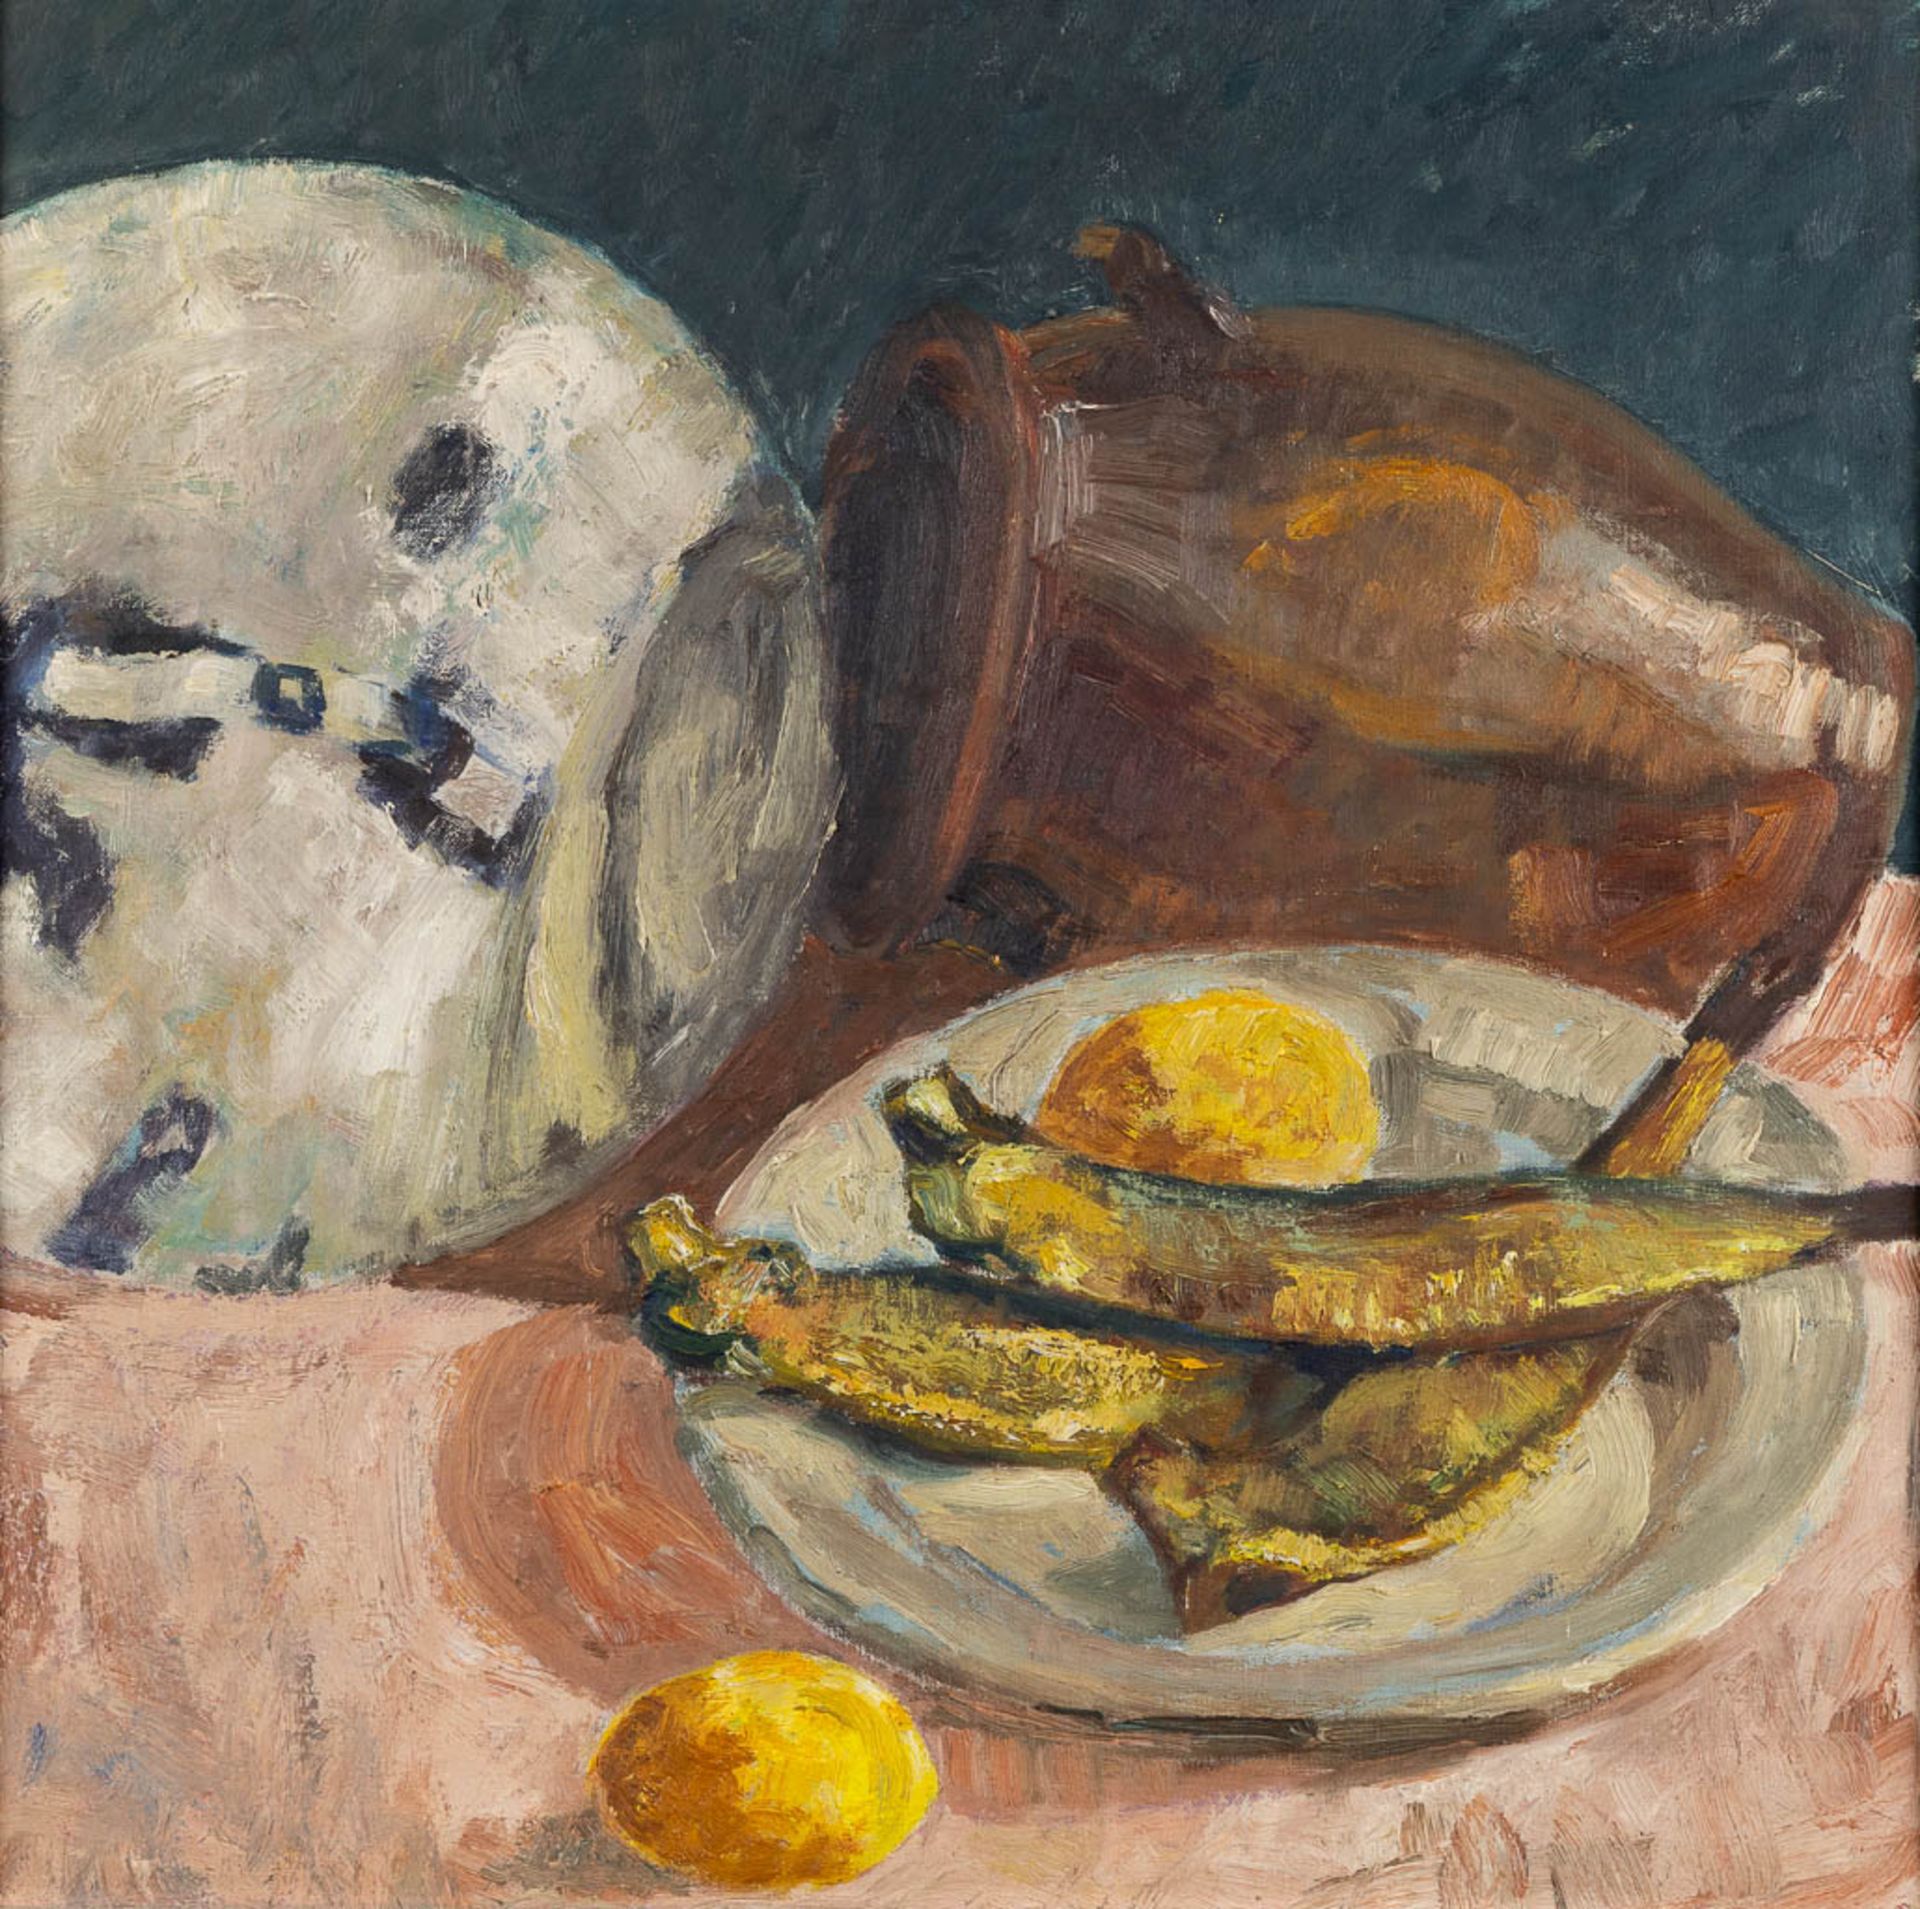 Frans PIENS (1922-1973) Two abstract stilllife paintings, oil on canvas. (W:92,5 x H:73,5 cm) - Image 12 of 14